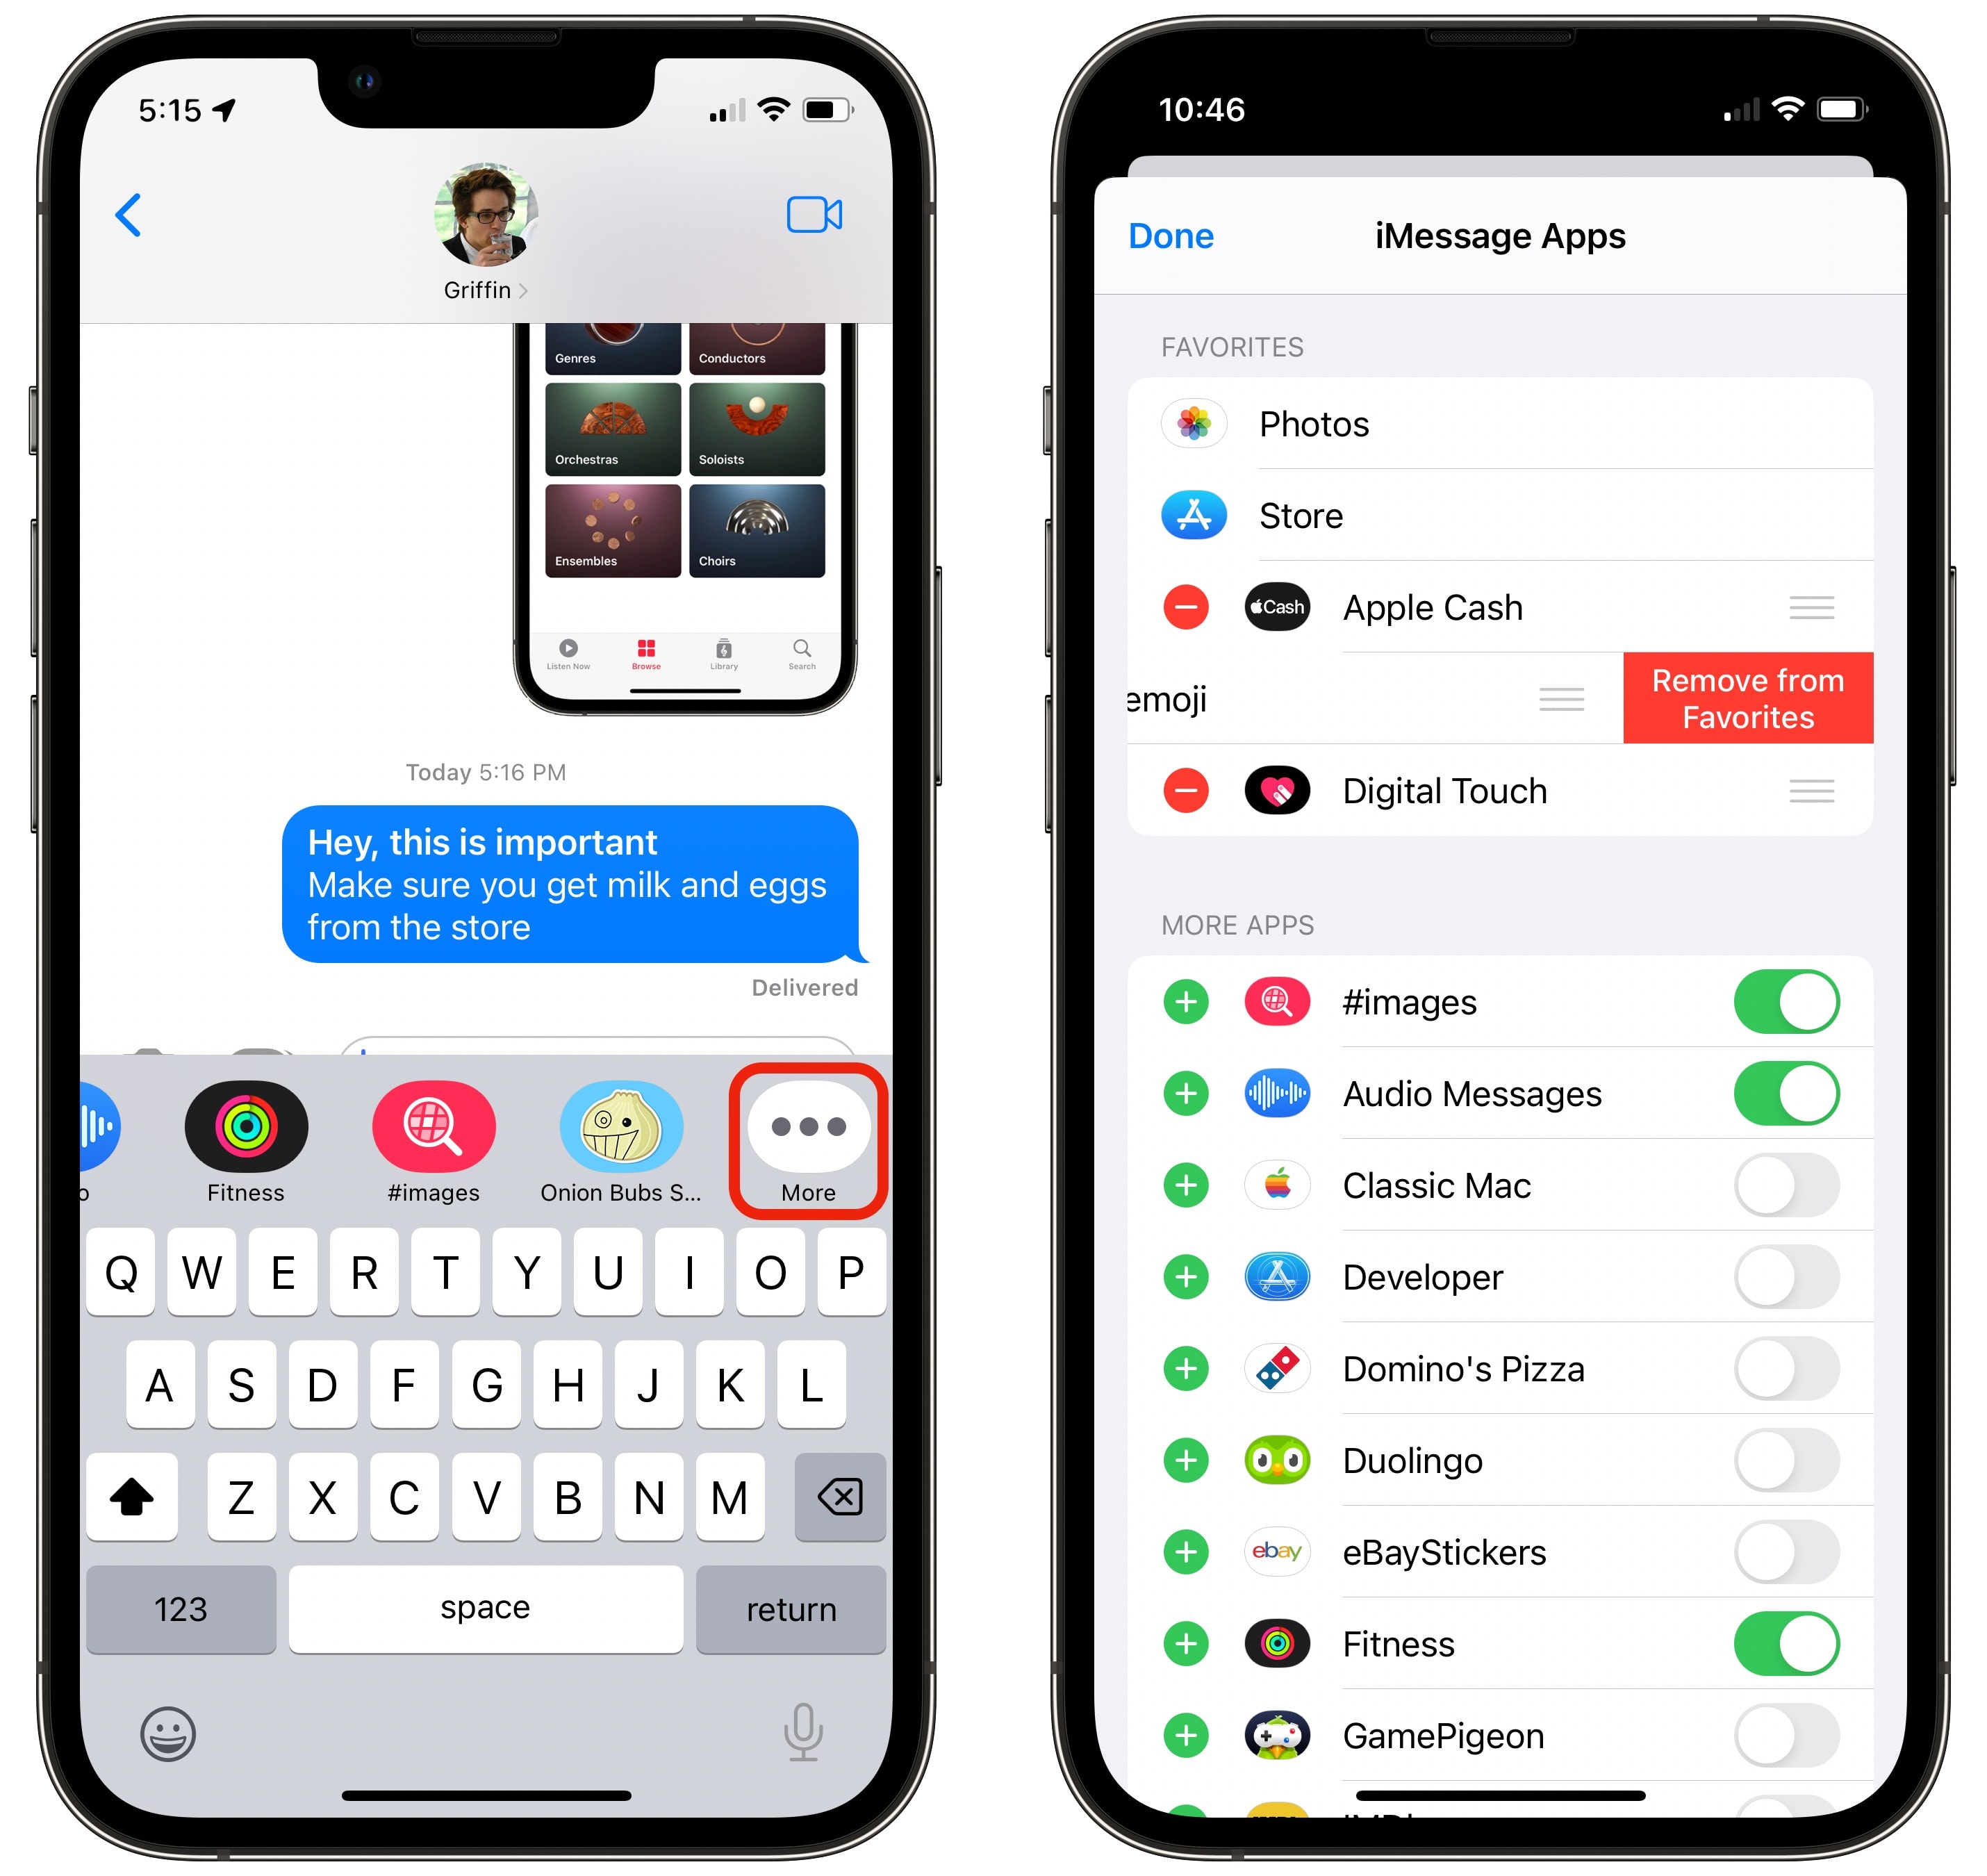 Clear out iMessage apps from the list